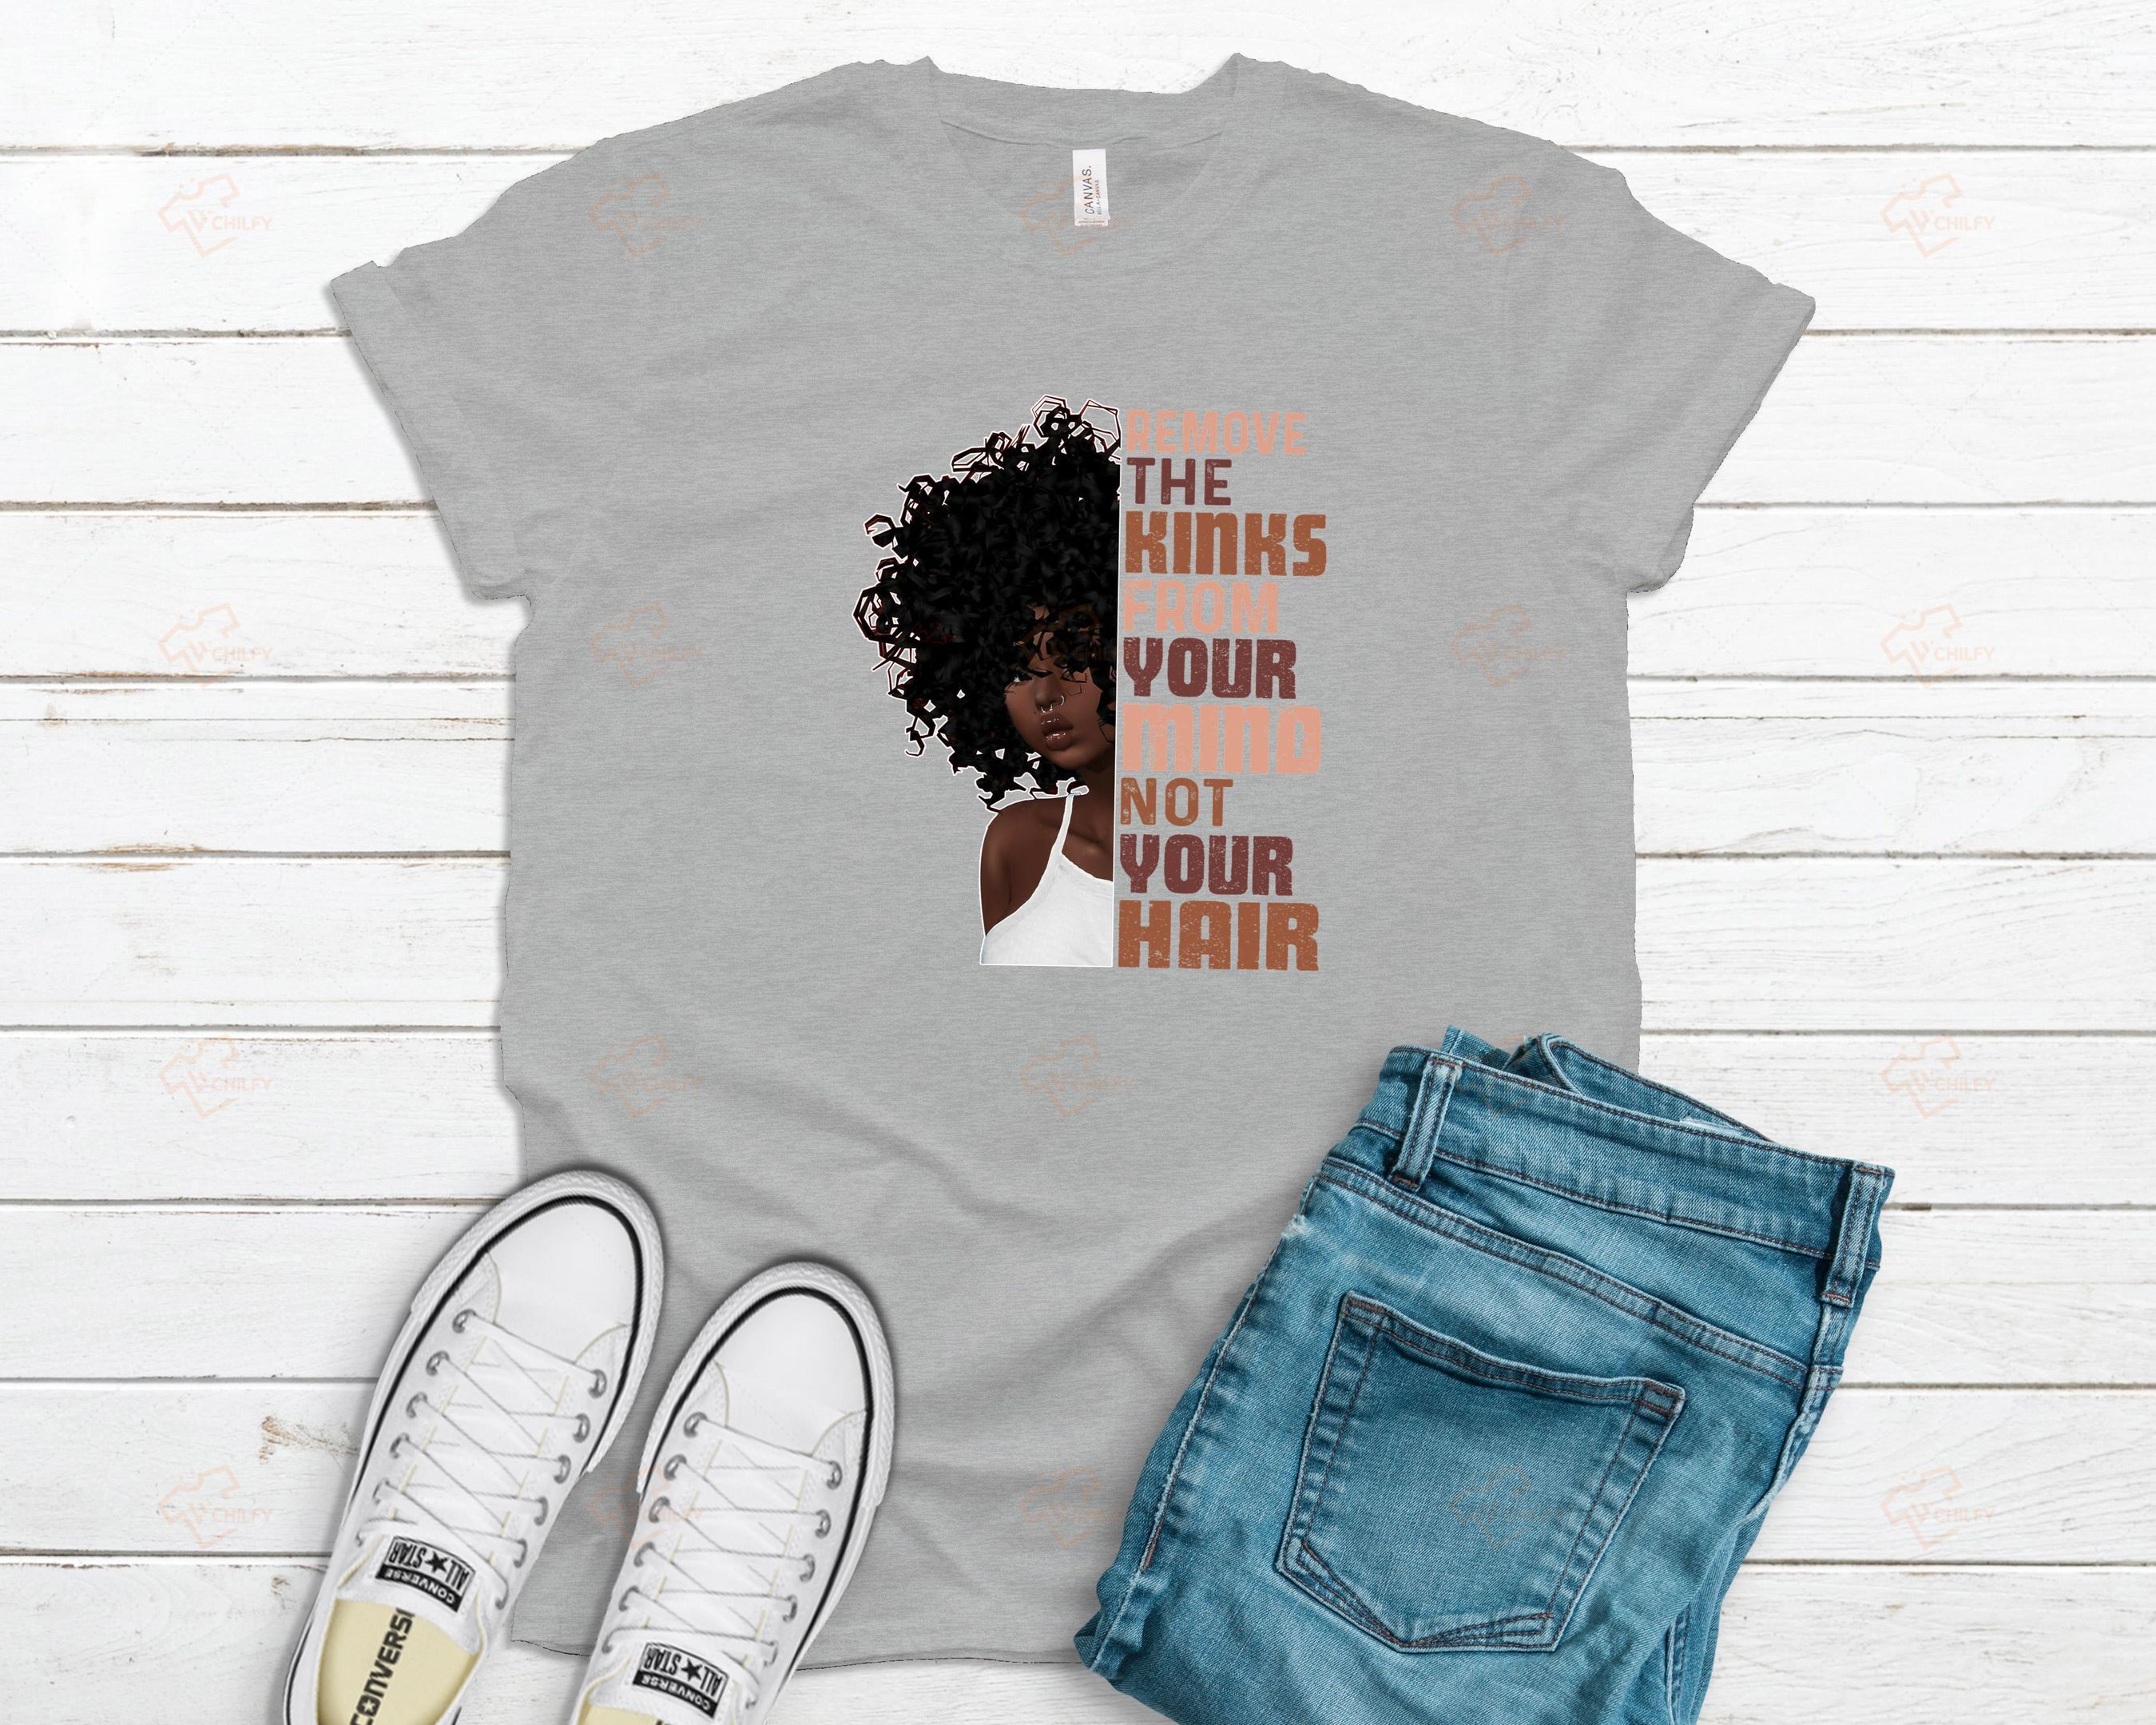 Remove the kinks from your mind not your hair shirt, Afro girl shirt, Black girl shirt